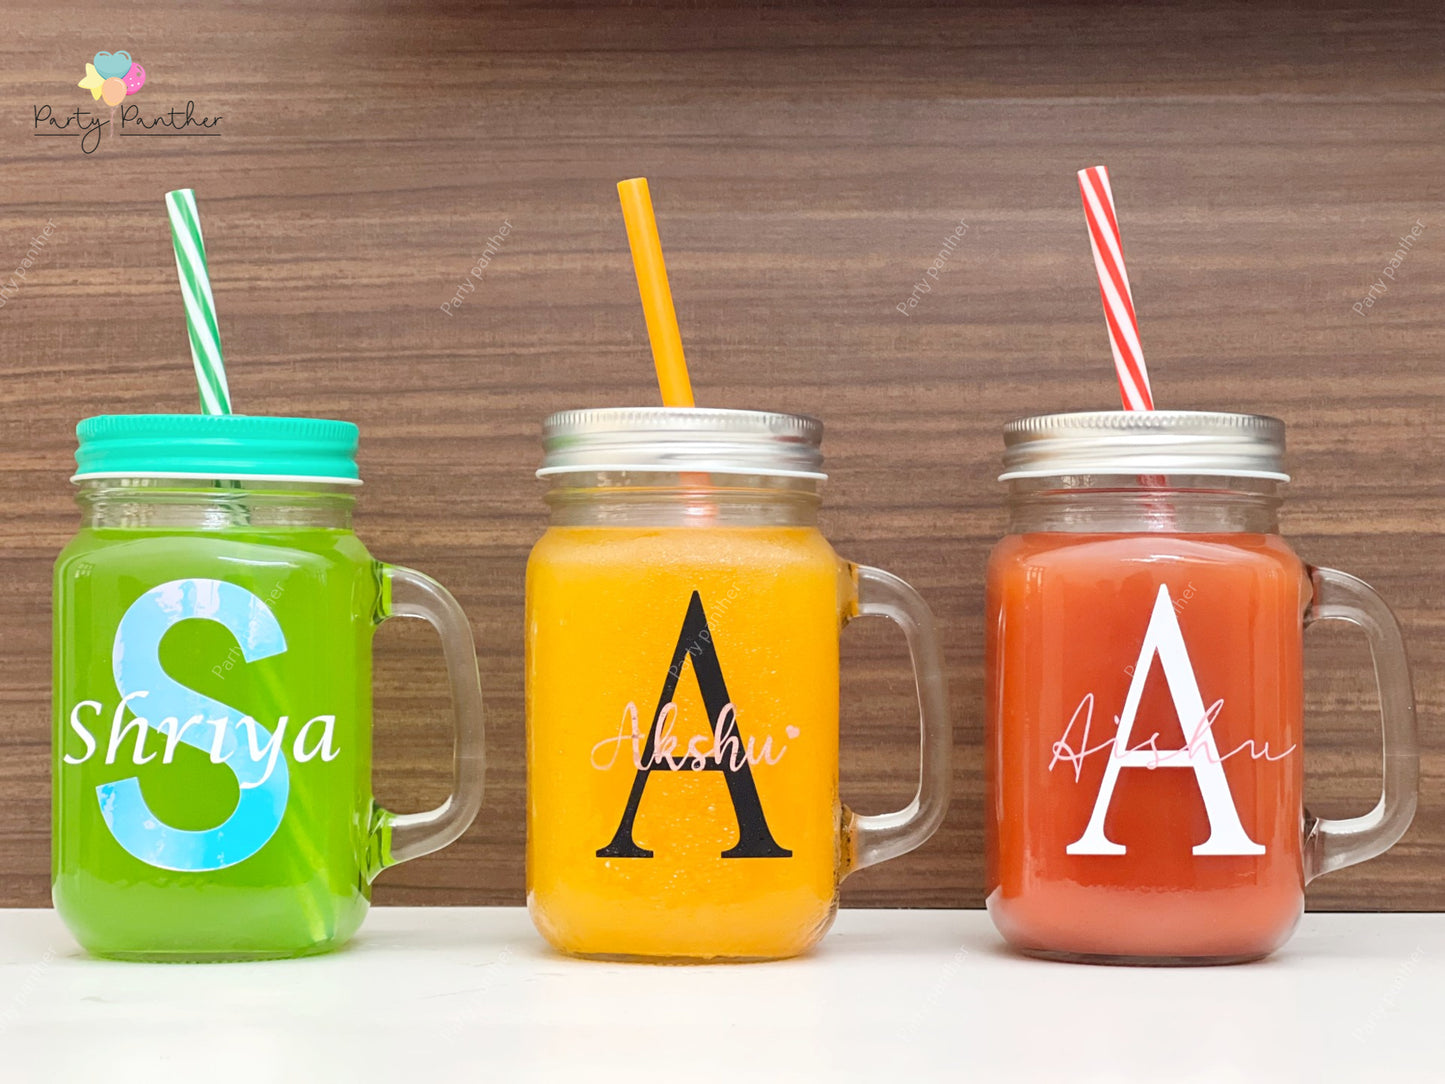 Personalised mason jar with straw and 2 lids - 1 lid with hole and 1 without hole